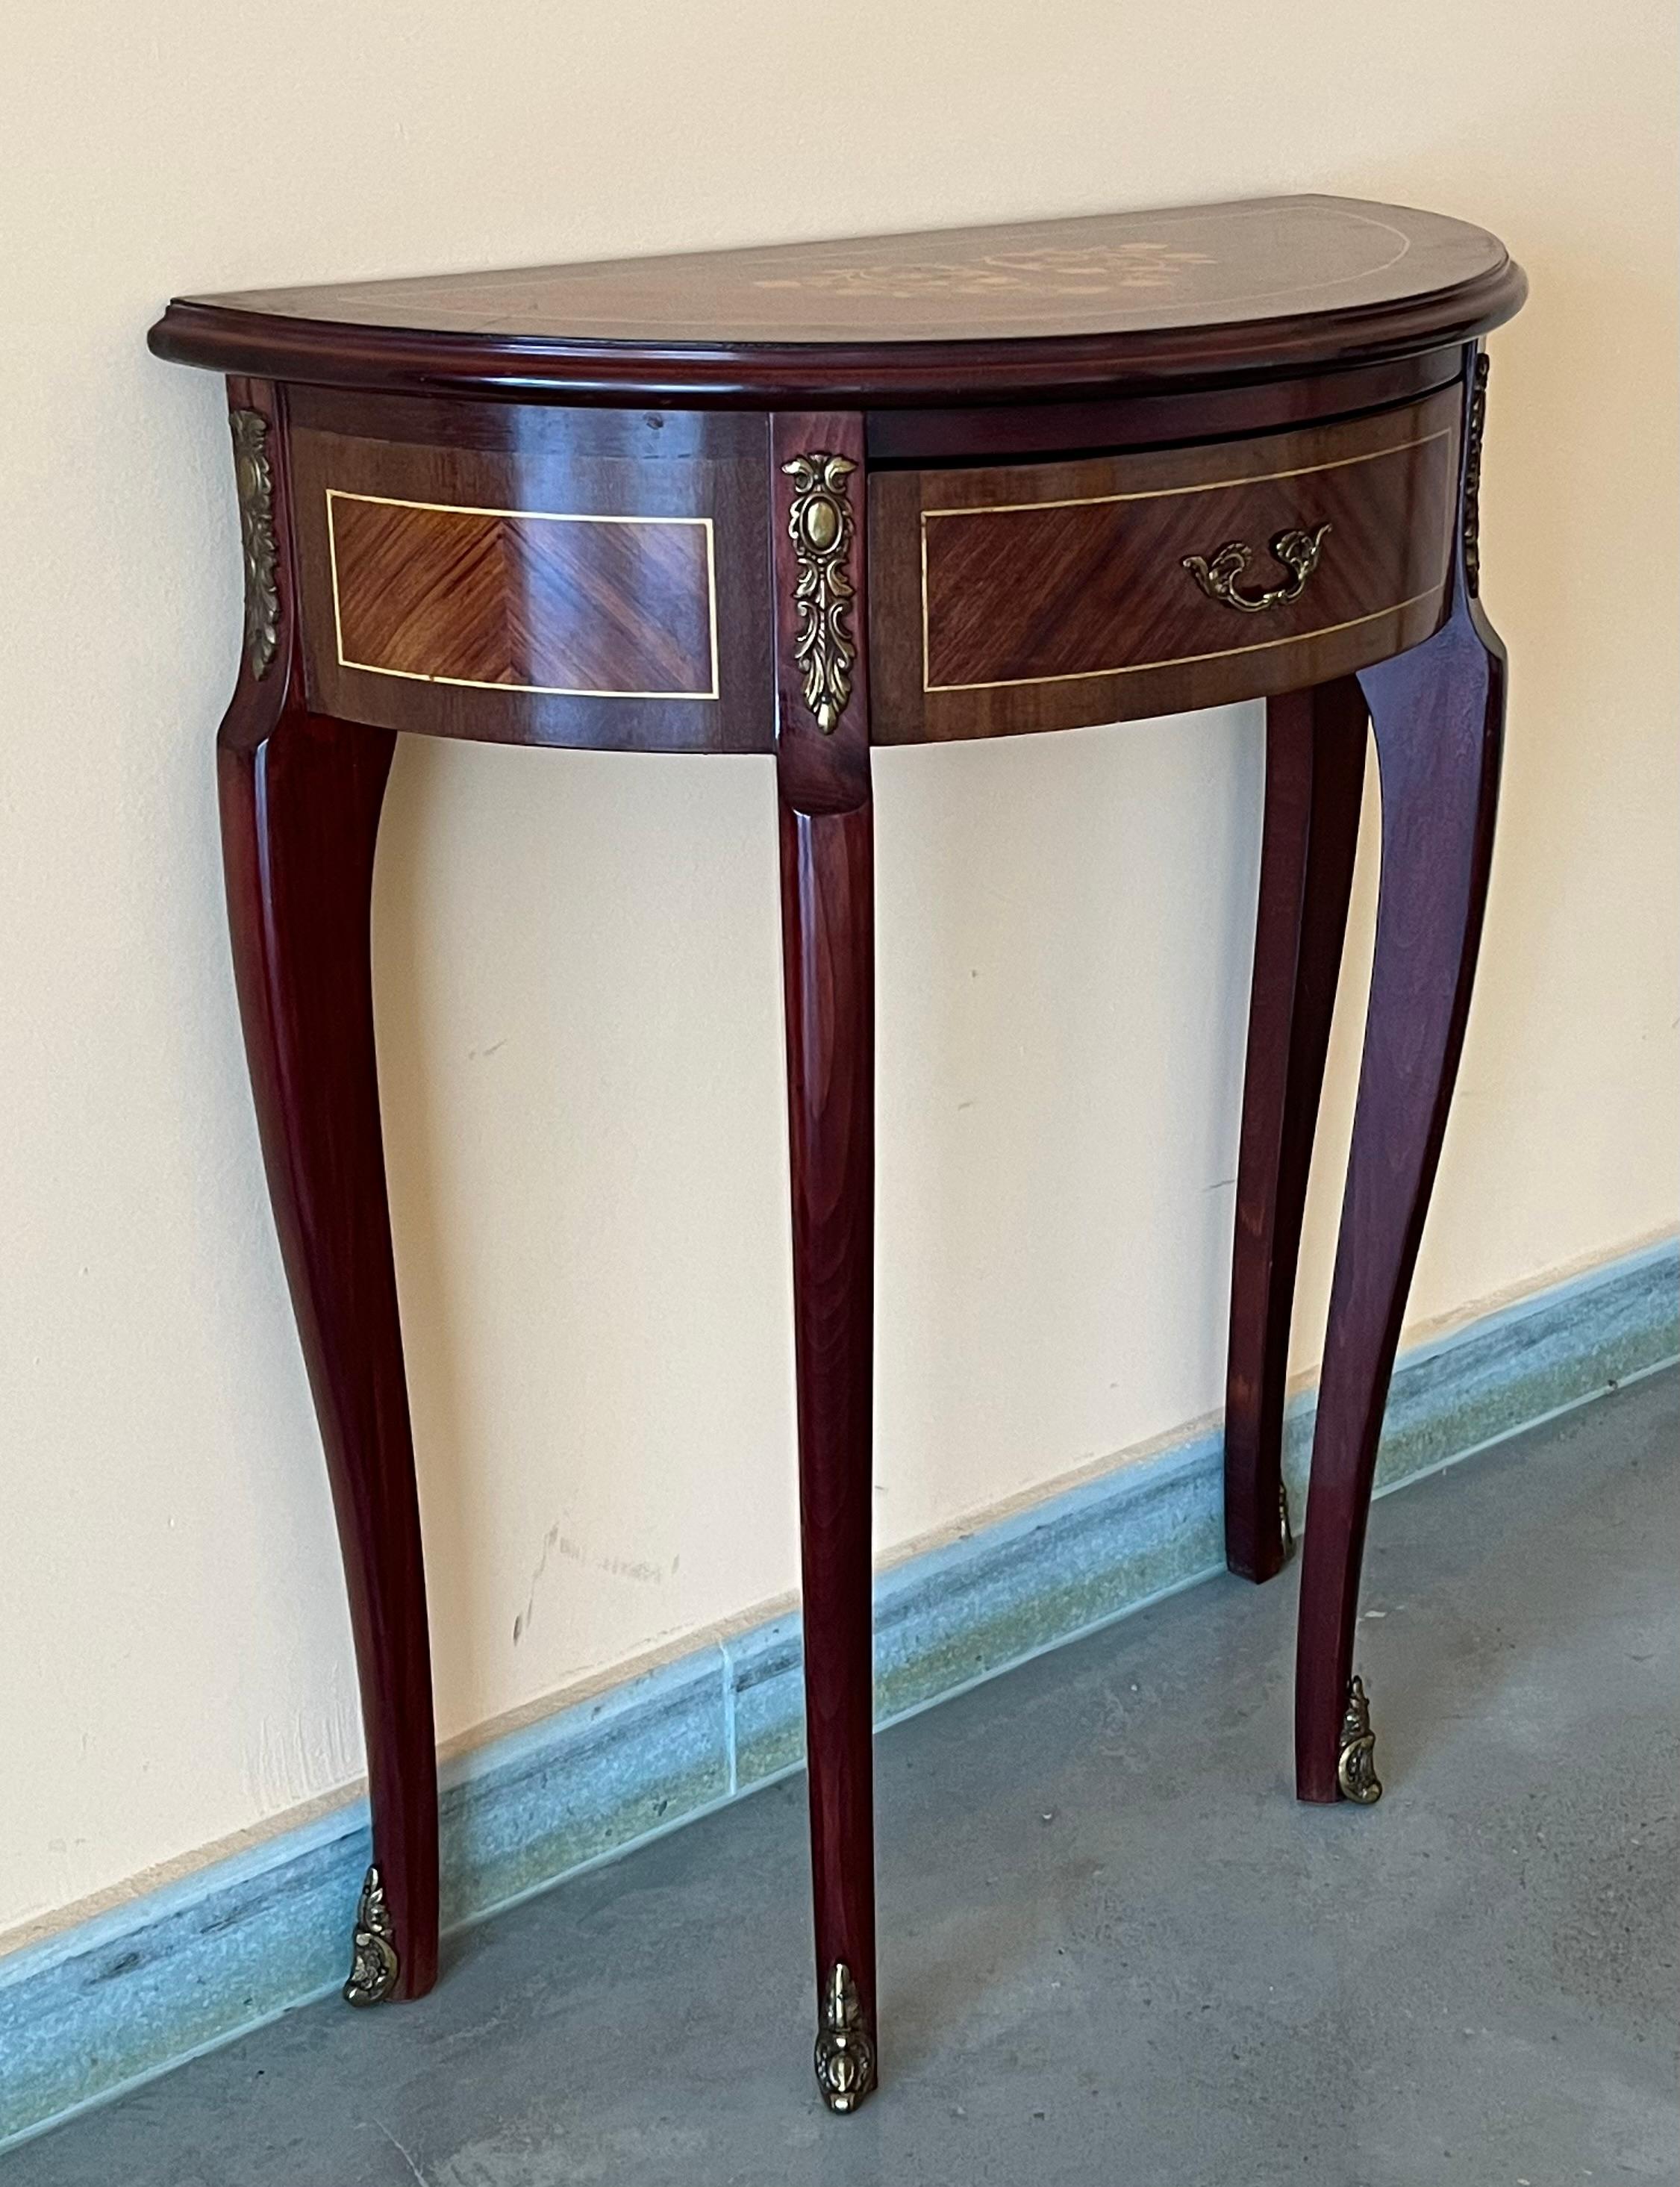 20th Century French George III Satinwood Marquetry Side Table with Drawer